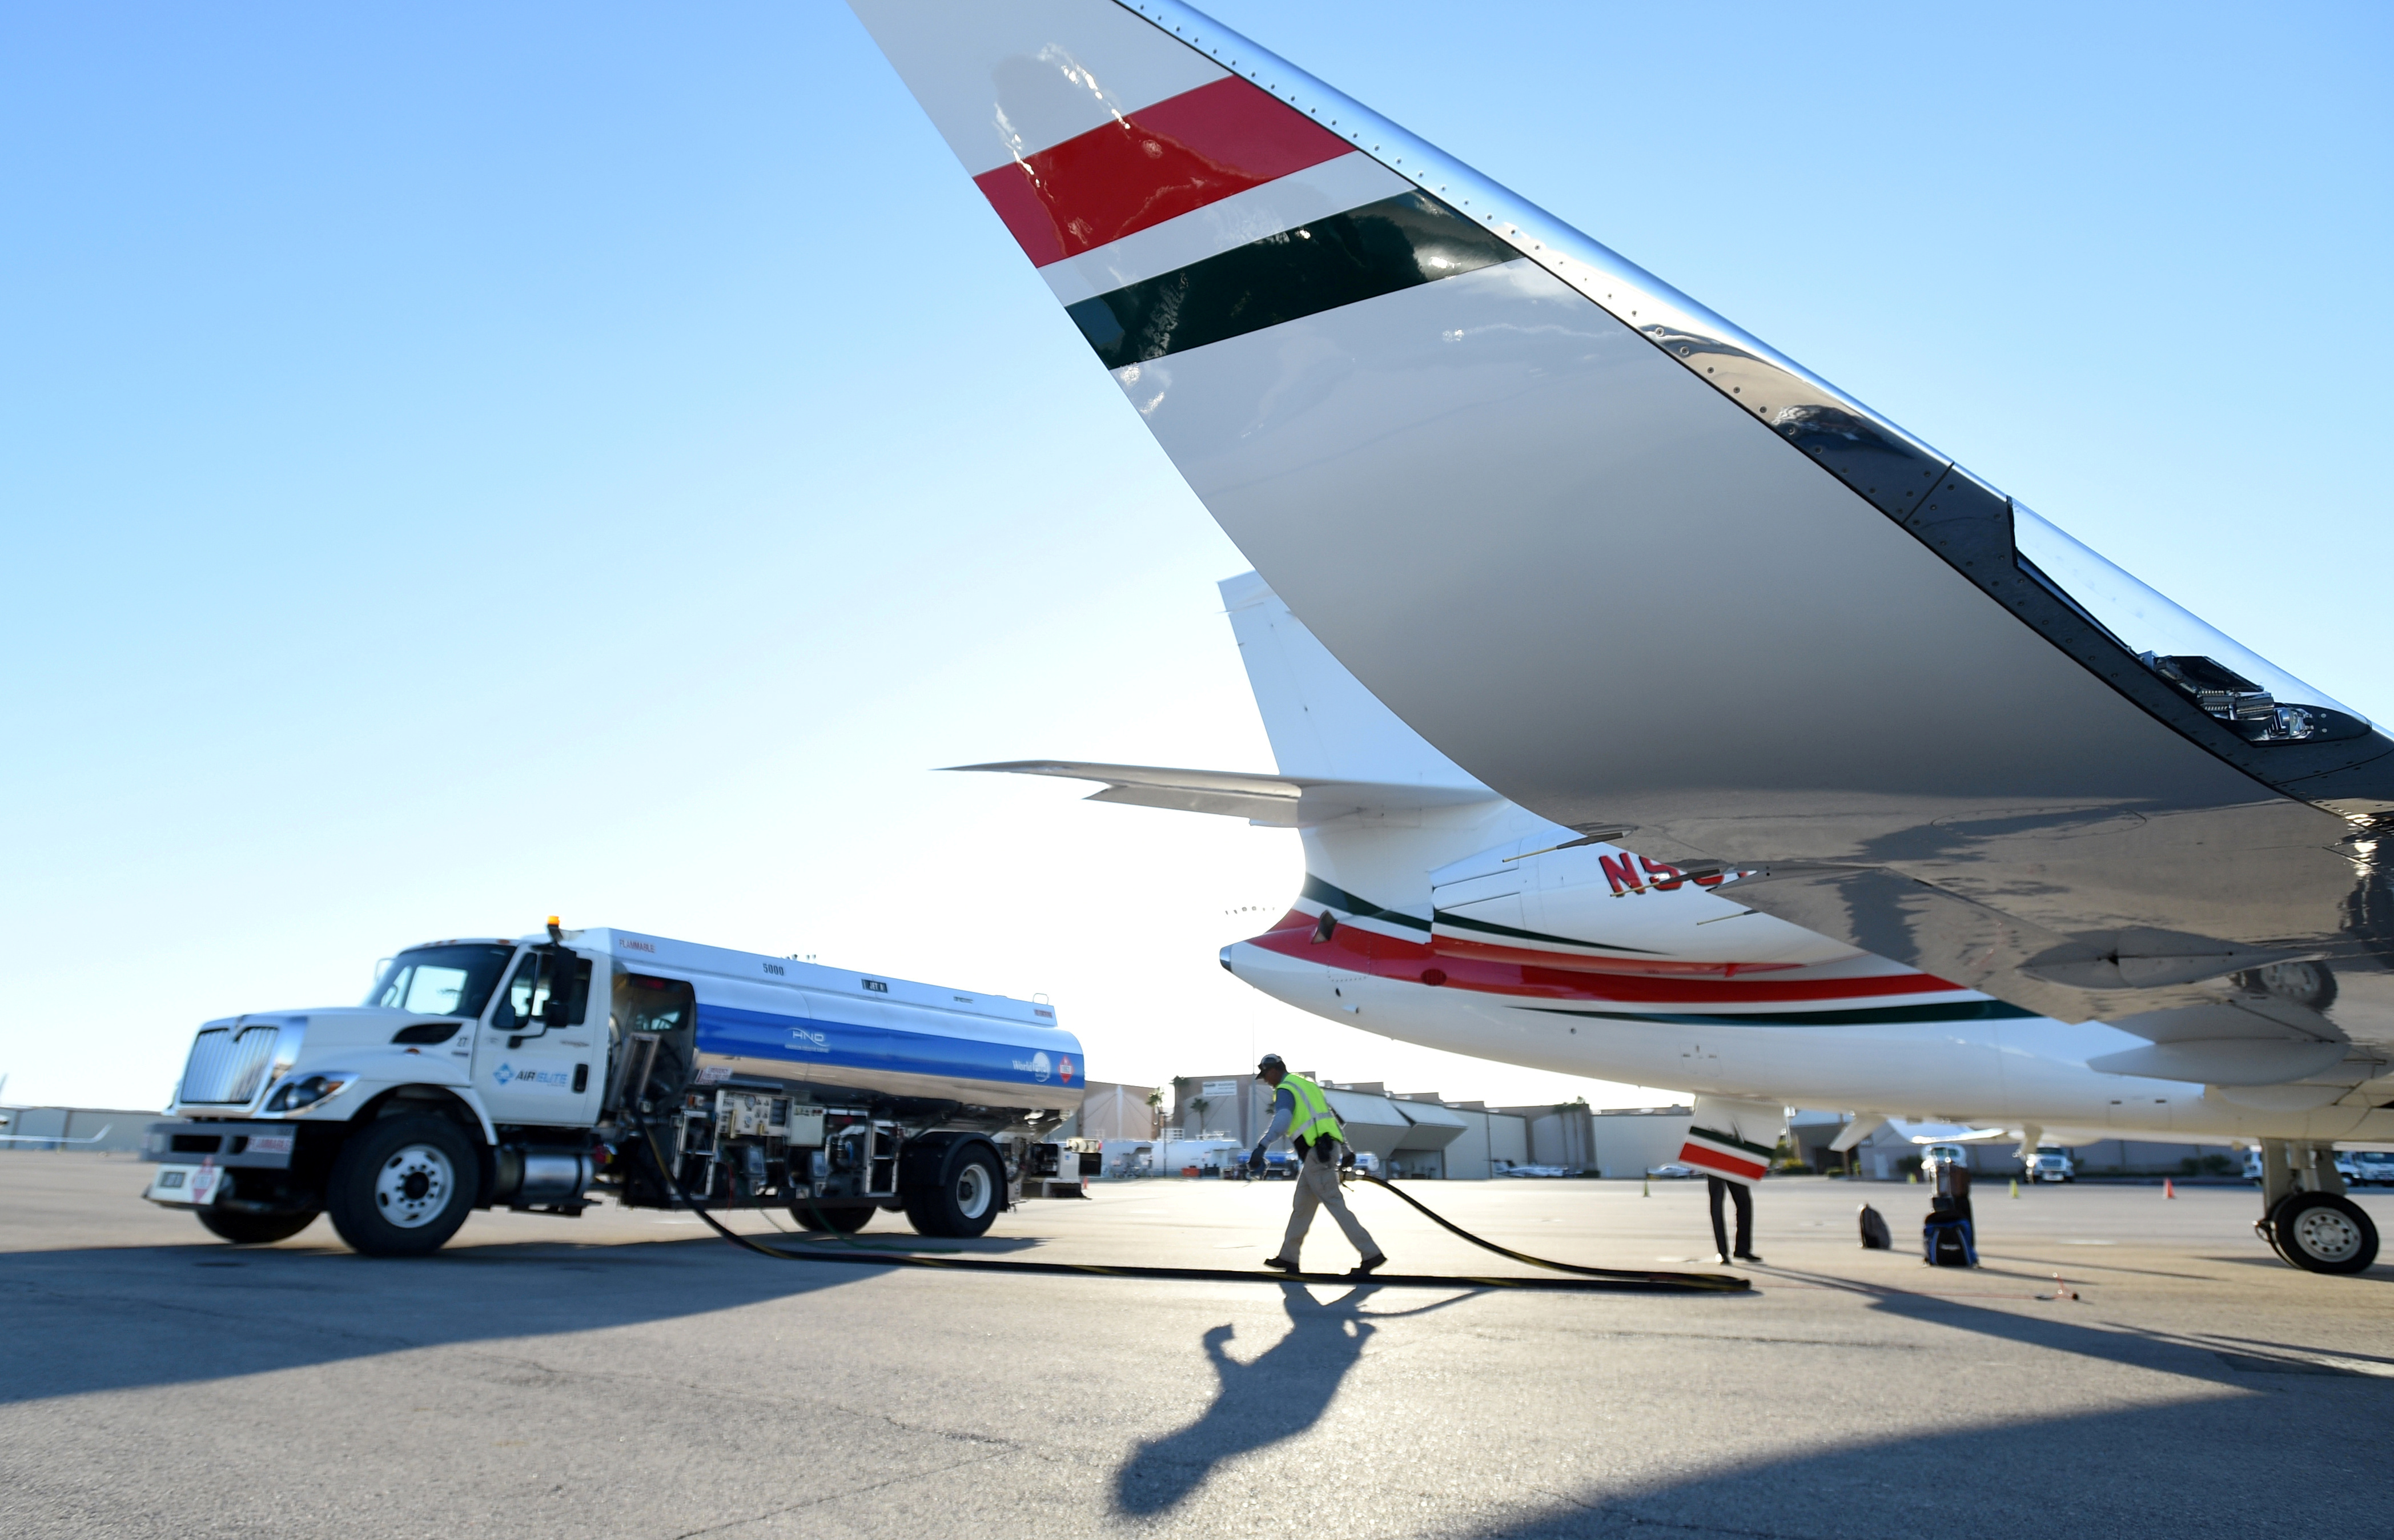 A business jet is refueled using Jet A fuel at the Henderson Executive Airport during the National Business Aviation Association (NBAA) exhibition in Las Vegas